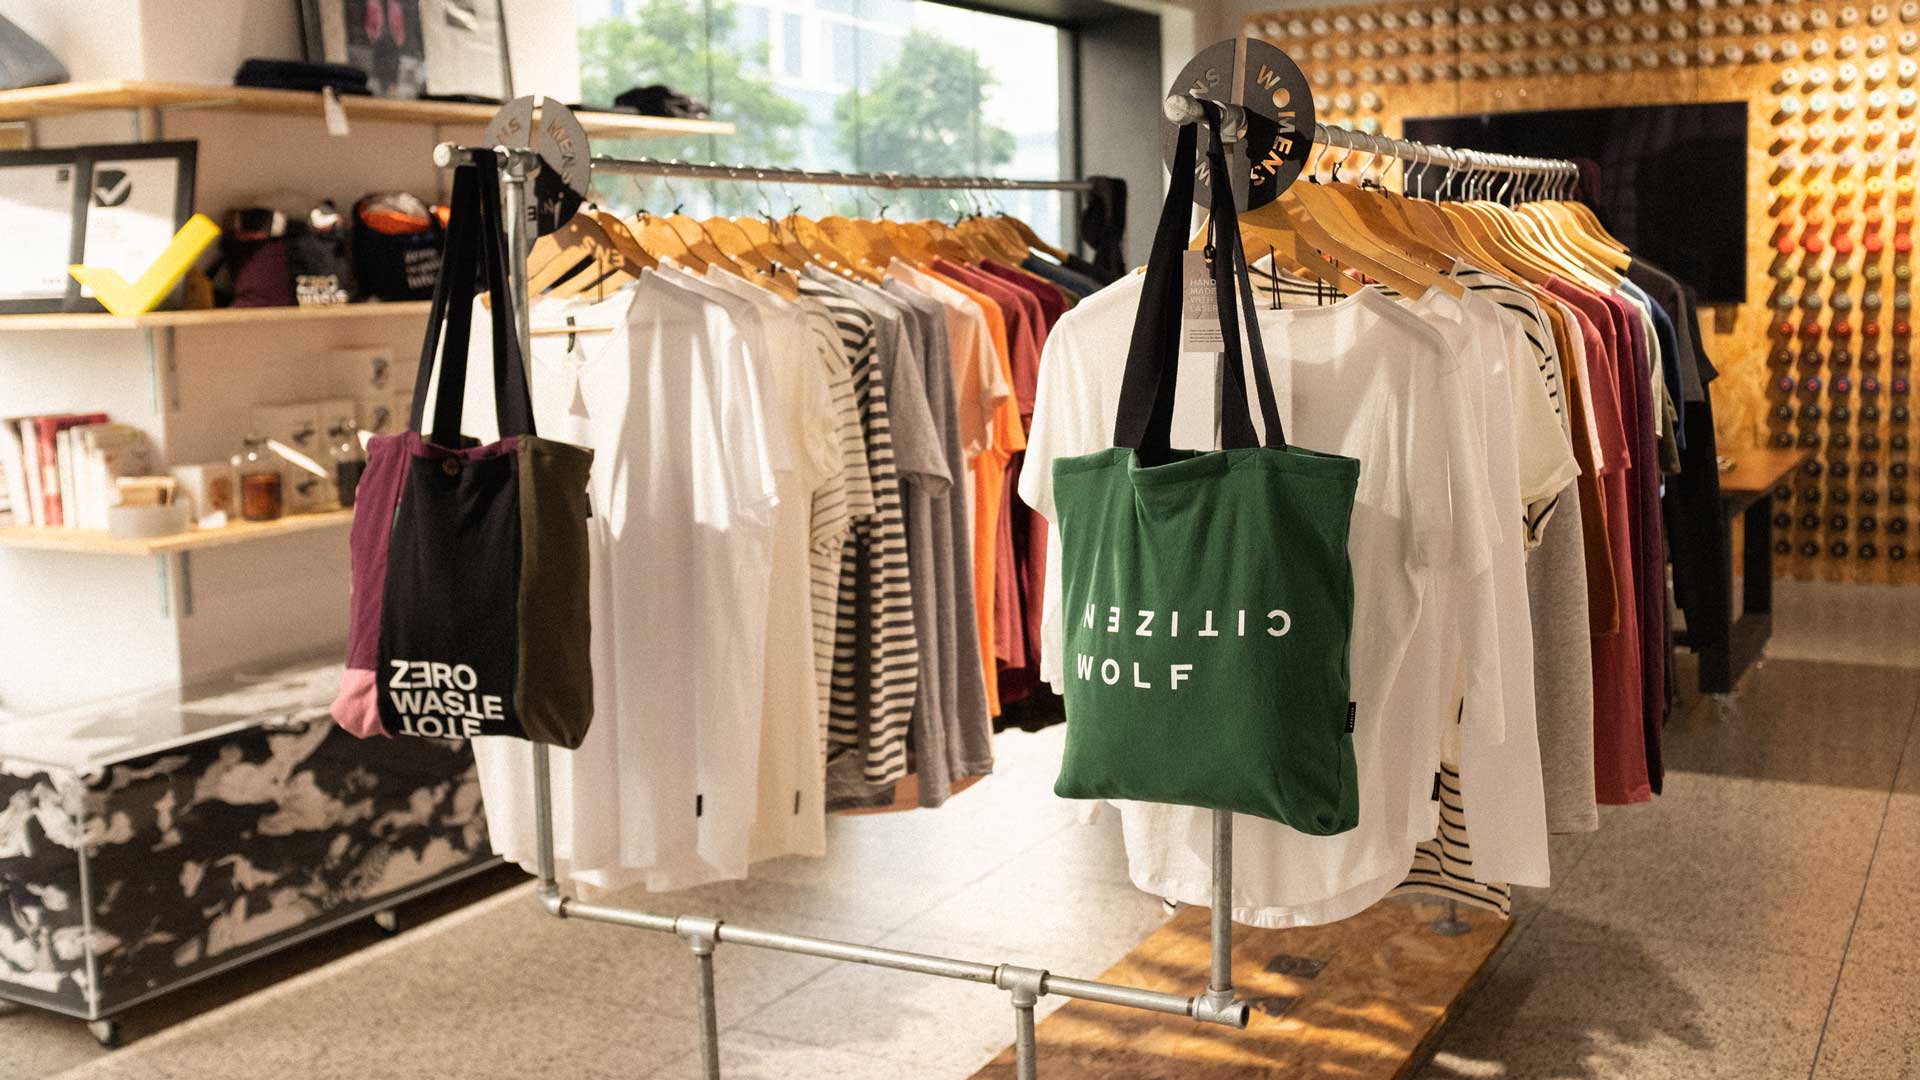 Our Sydney store has moved | Citizen Wolf